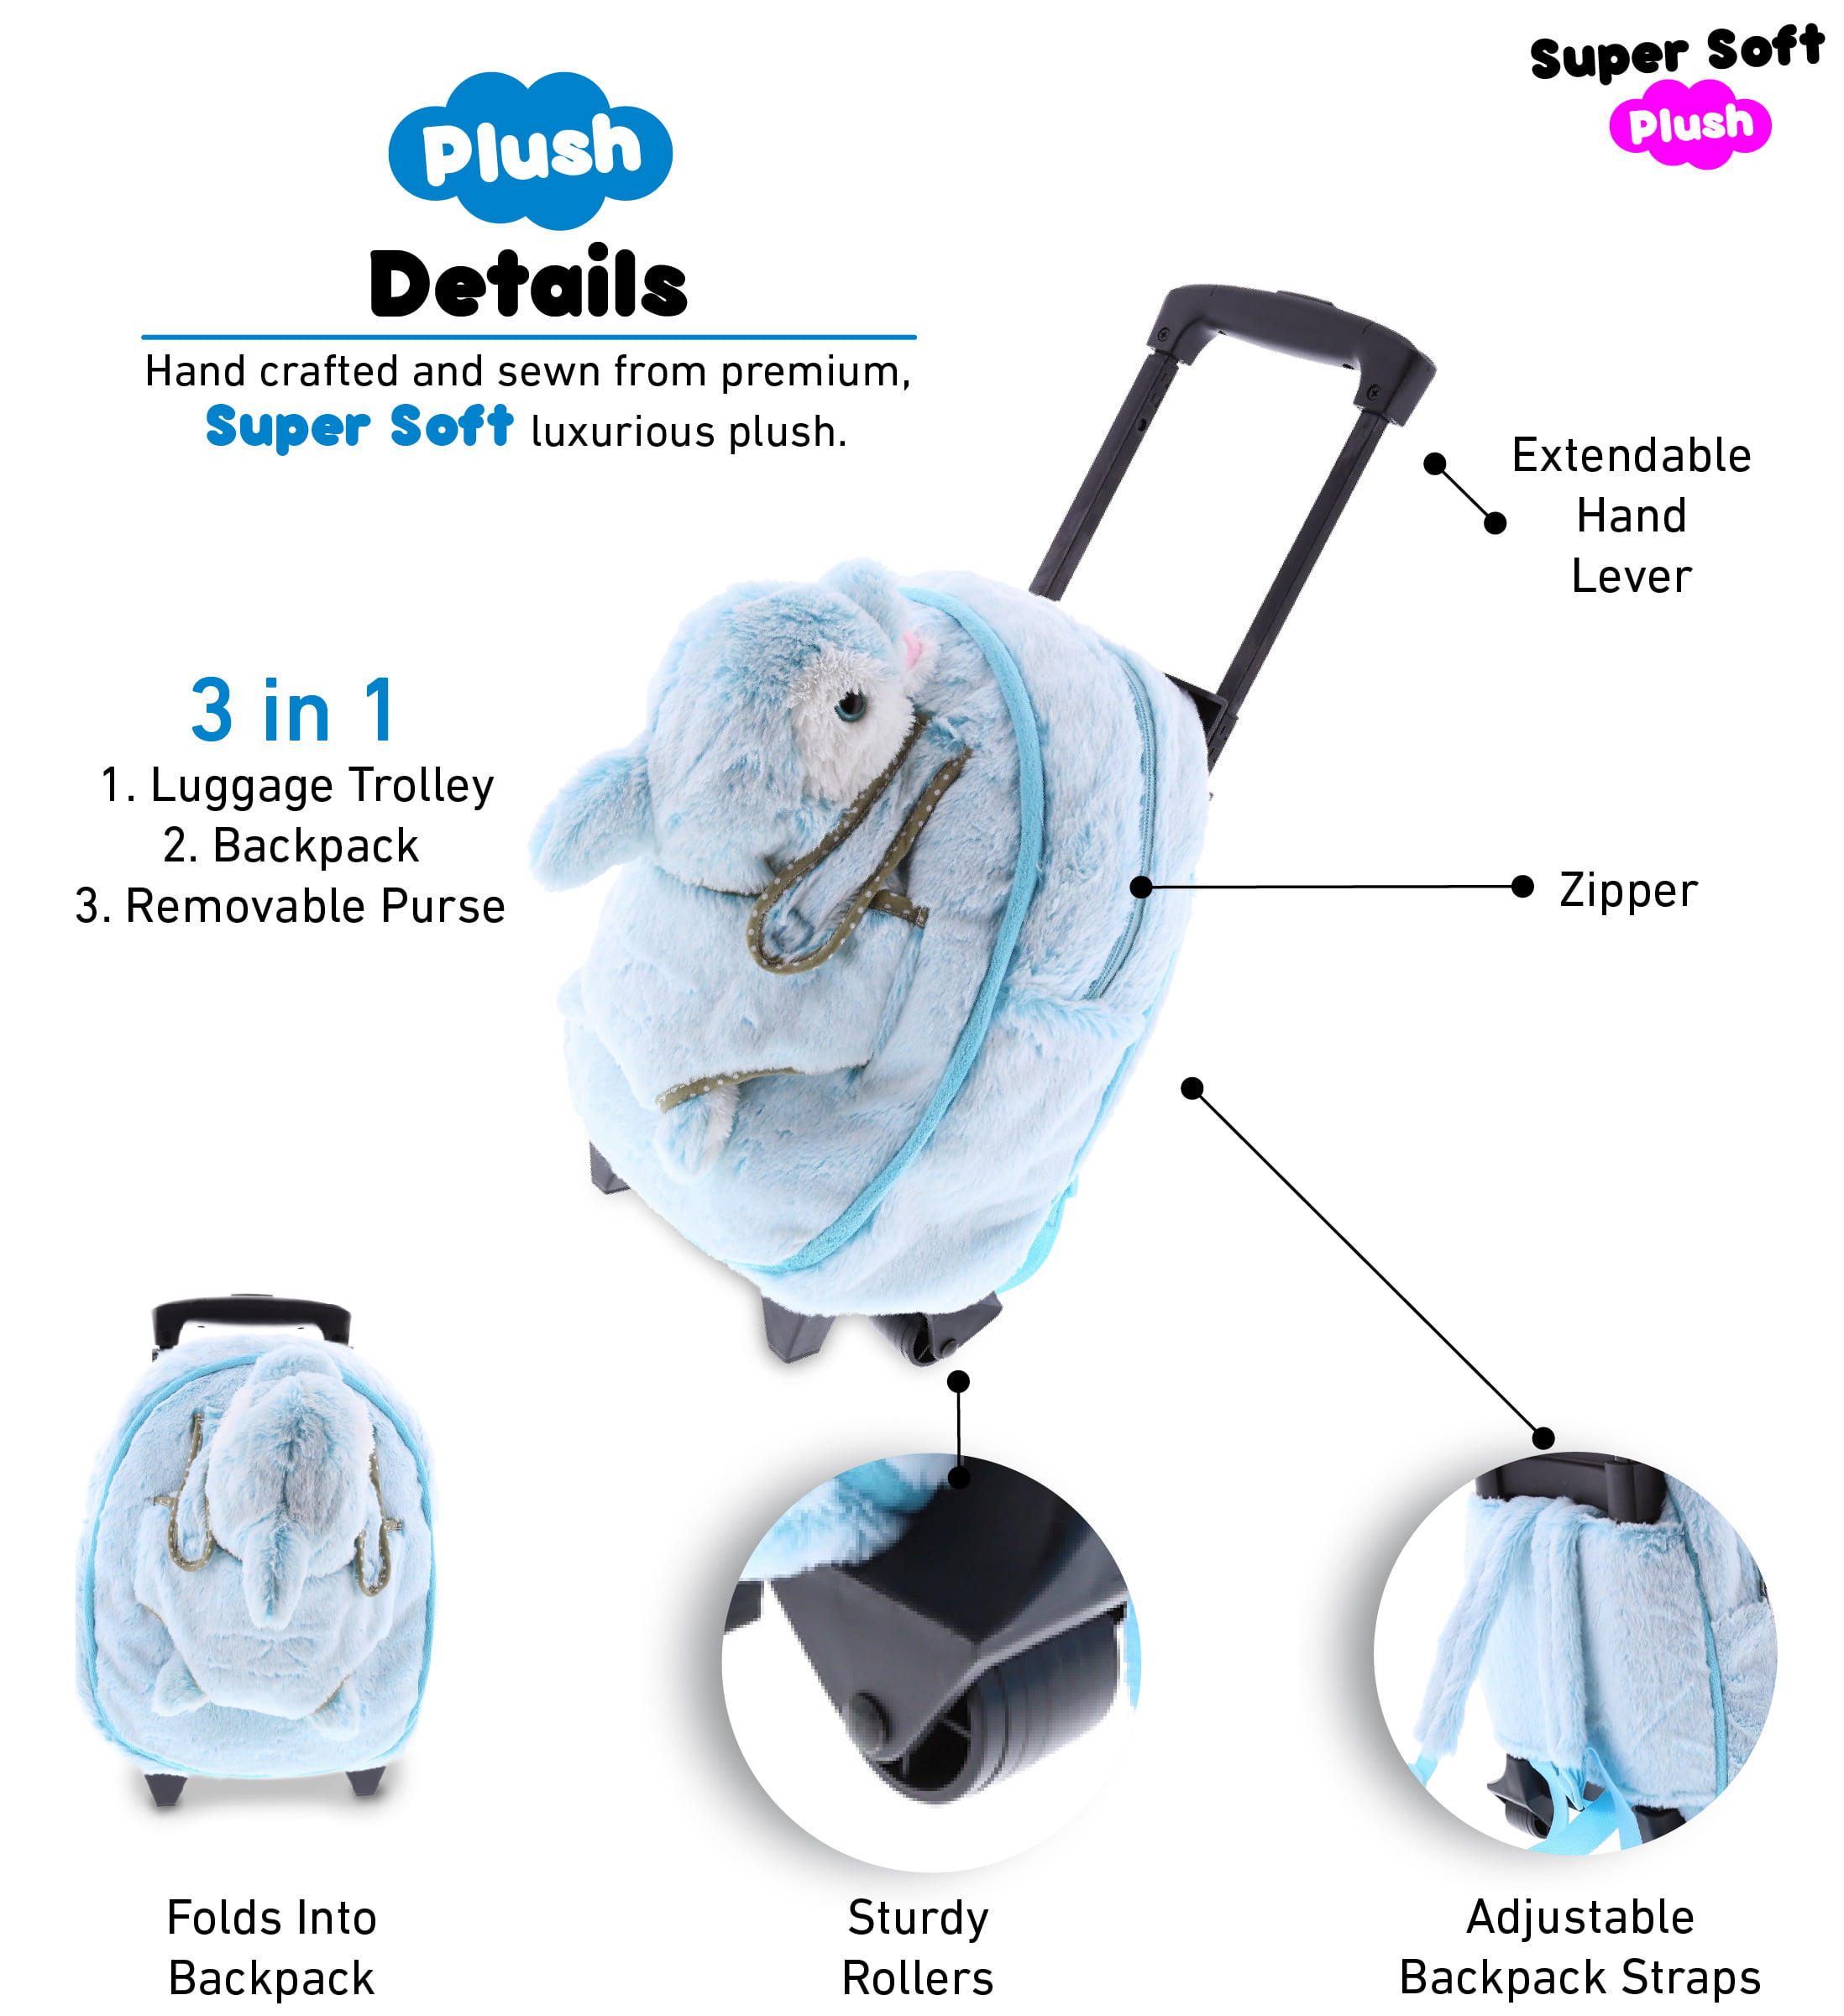 DolliBu Dolphin Plush Trolley & Purse Set - 3-in-1 Kids Trolley, Backpack,  & Blue Dolphin Purse, Soft Plush Backpack on Wheels, School Rolling Bag,  Travel Luggage with Removable Plush Toy Purse 